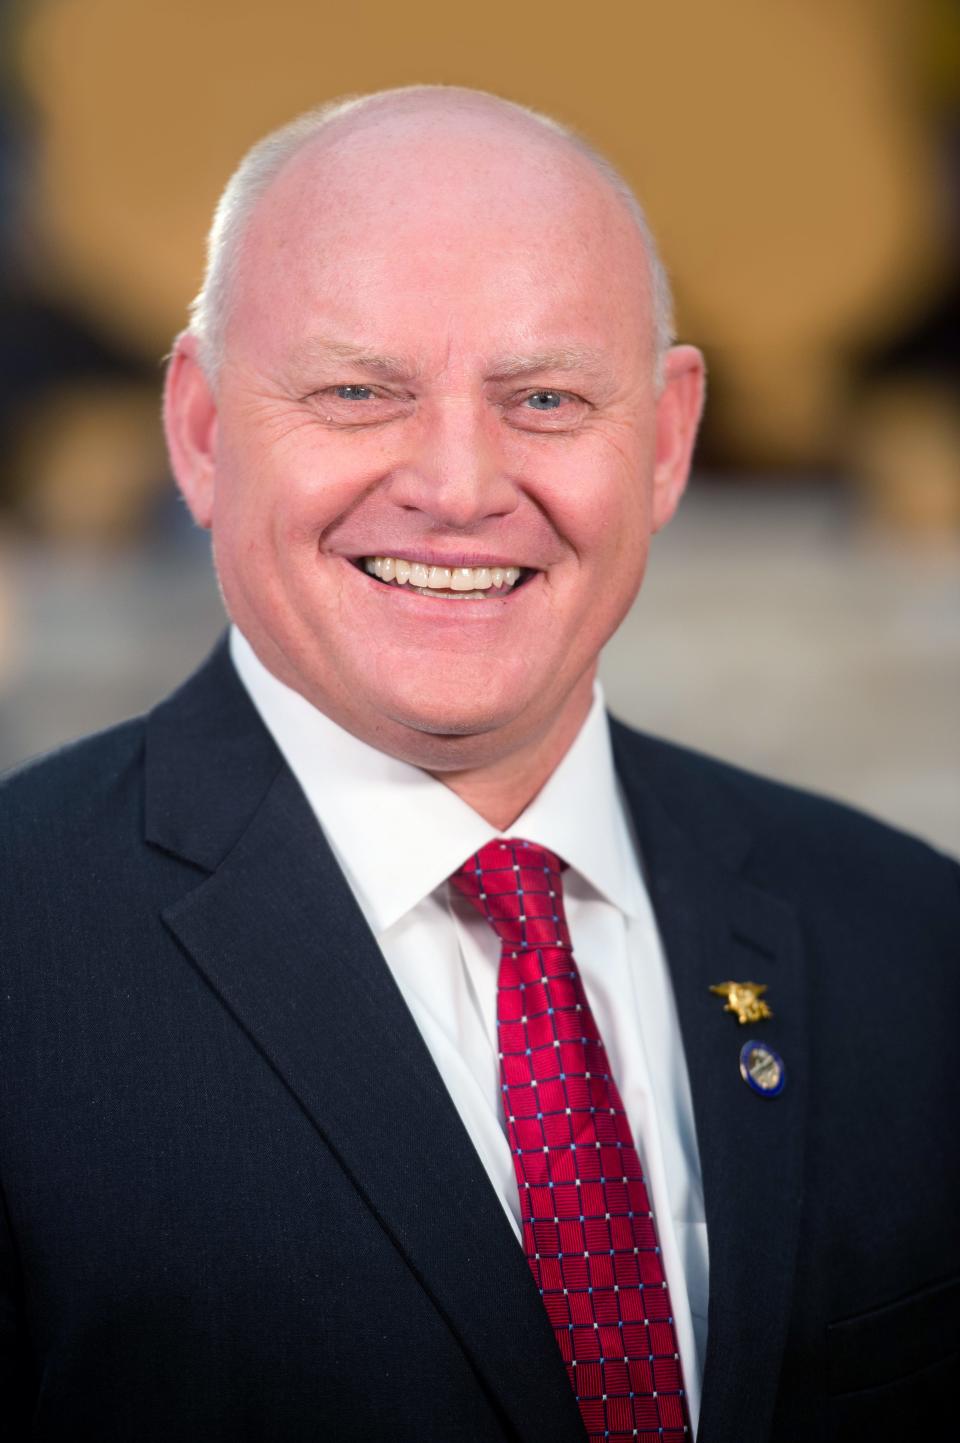 Senate Bill 361, introduced by Ohio Sen. Frank Hoagland, R-Mingo Junction, would allow military veterans to teach in K-12 classrooms without a traditional teacher's license.